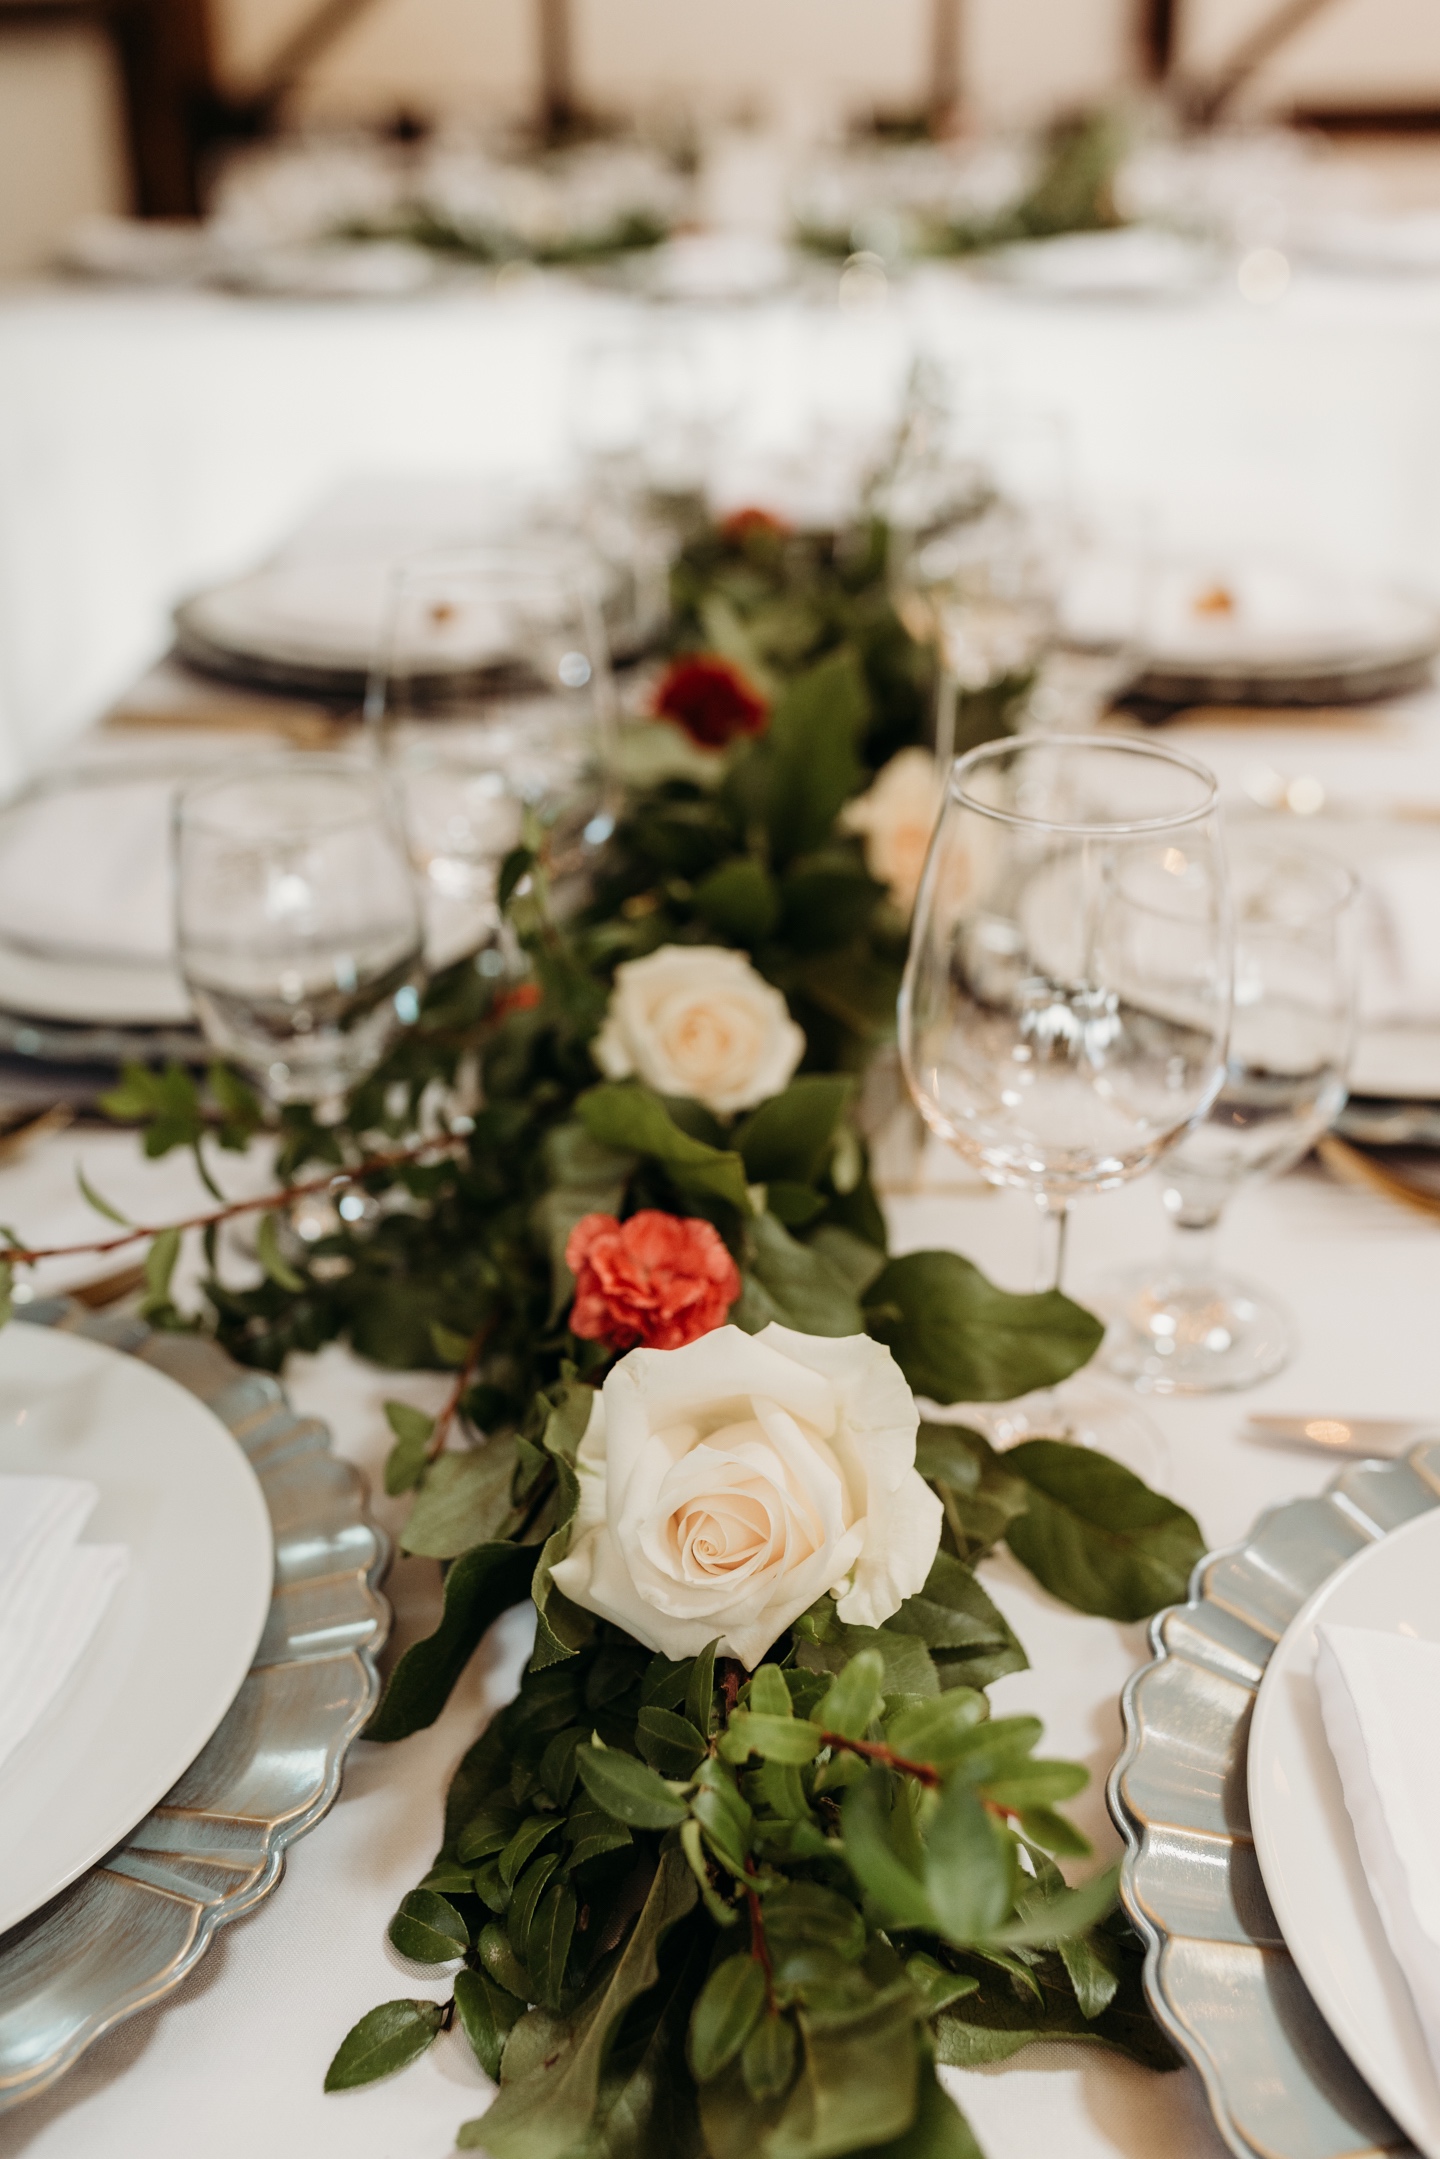 Green centerpiece with white rose in the center of plates and wine glasses.